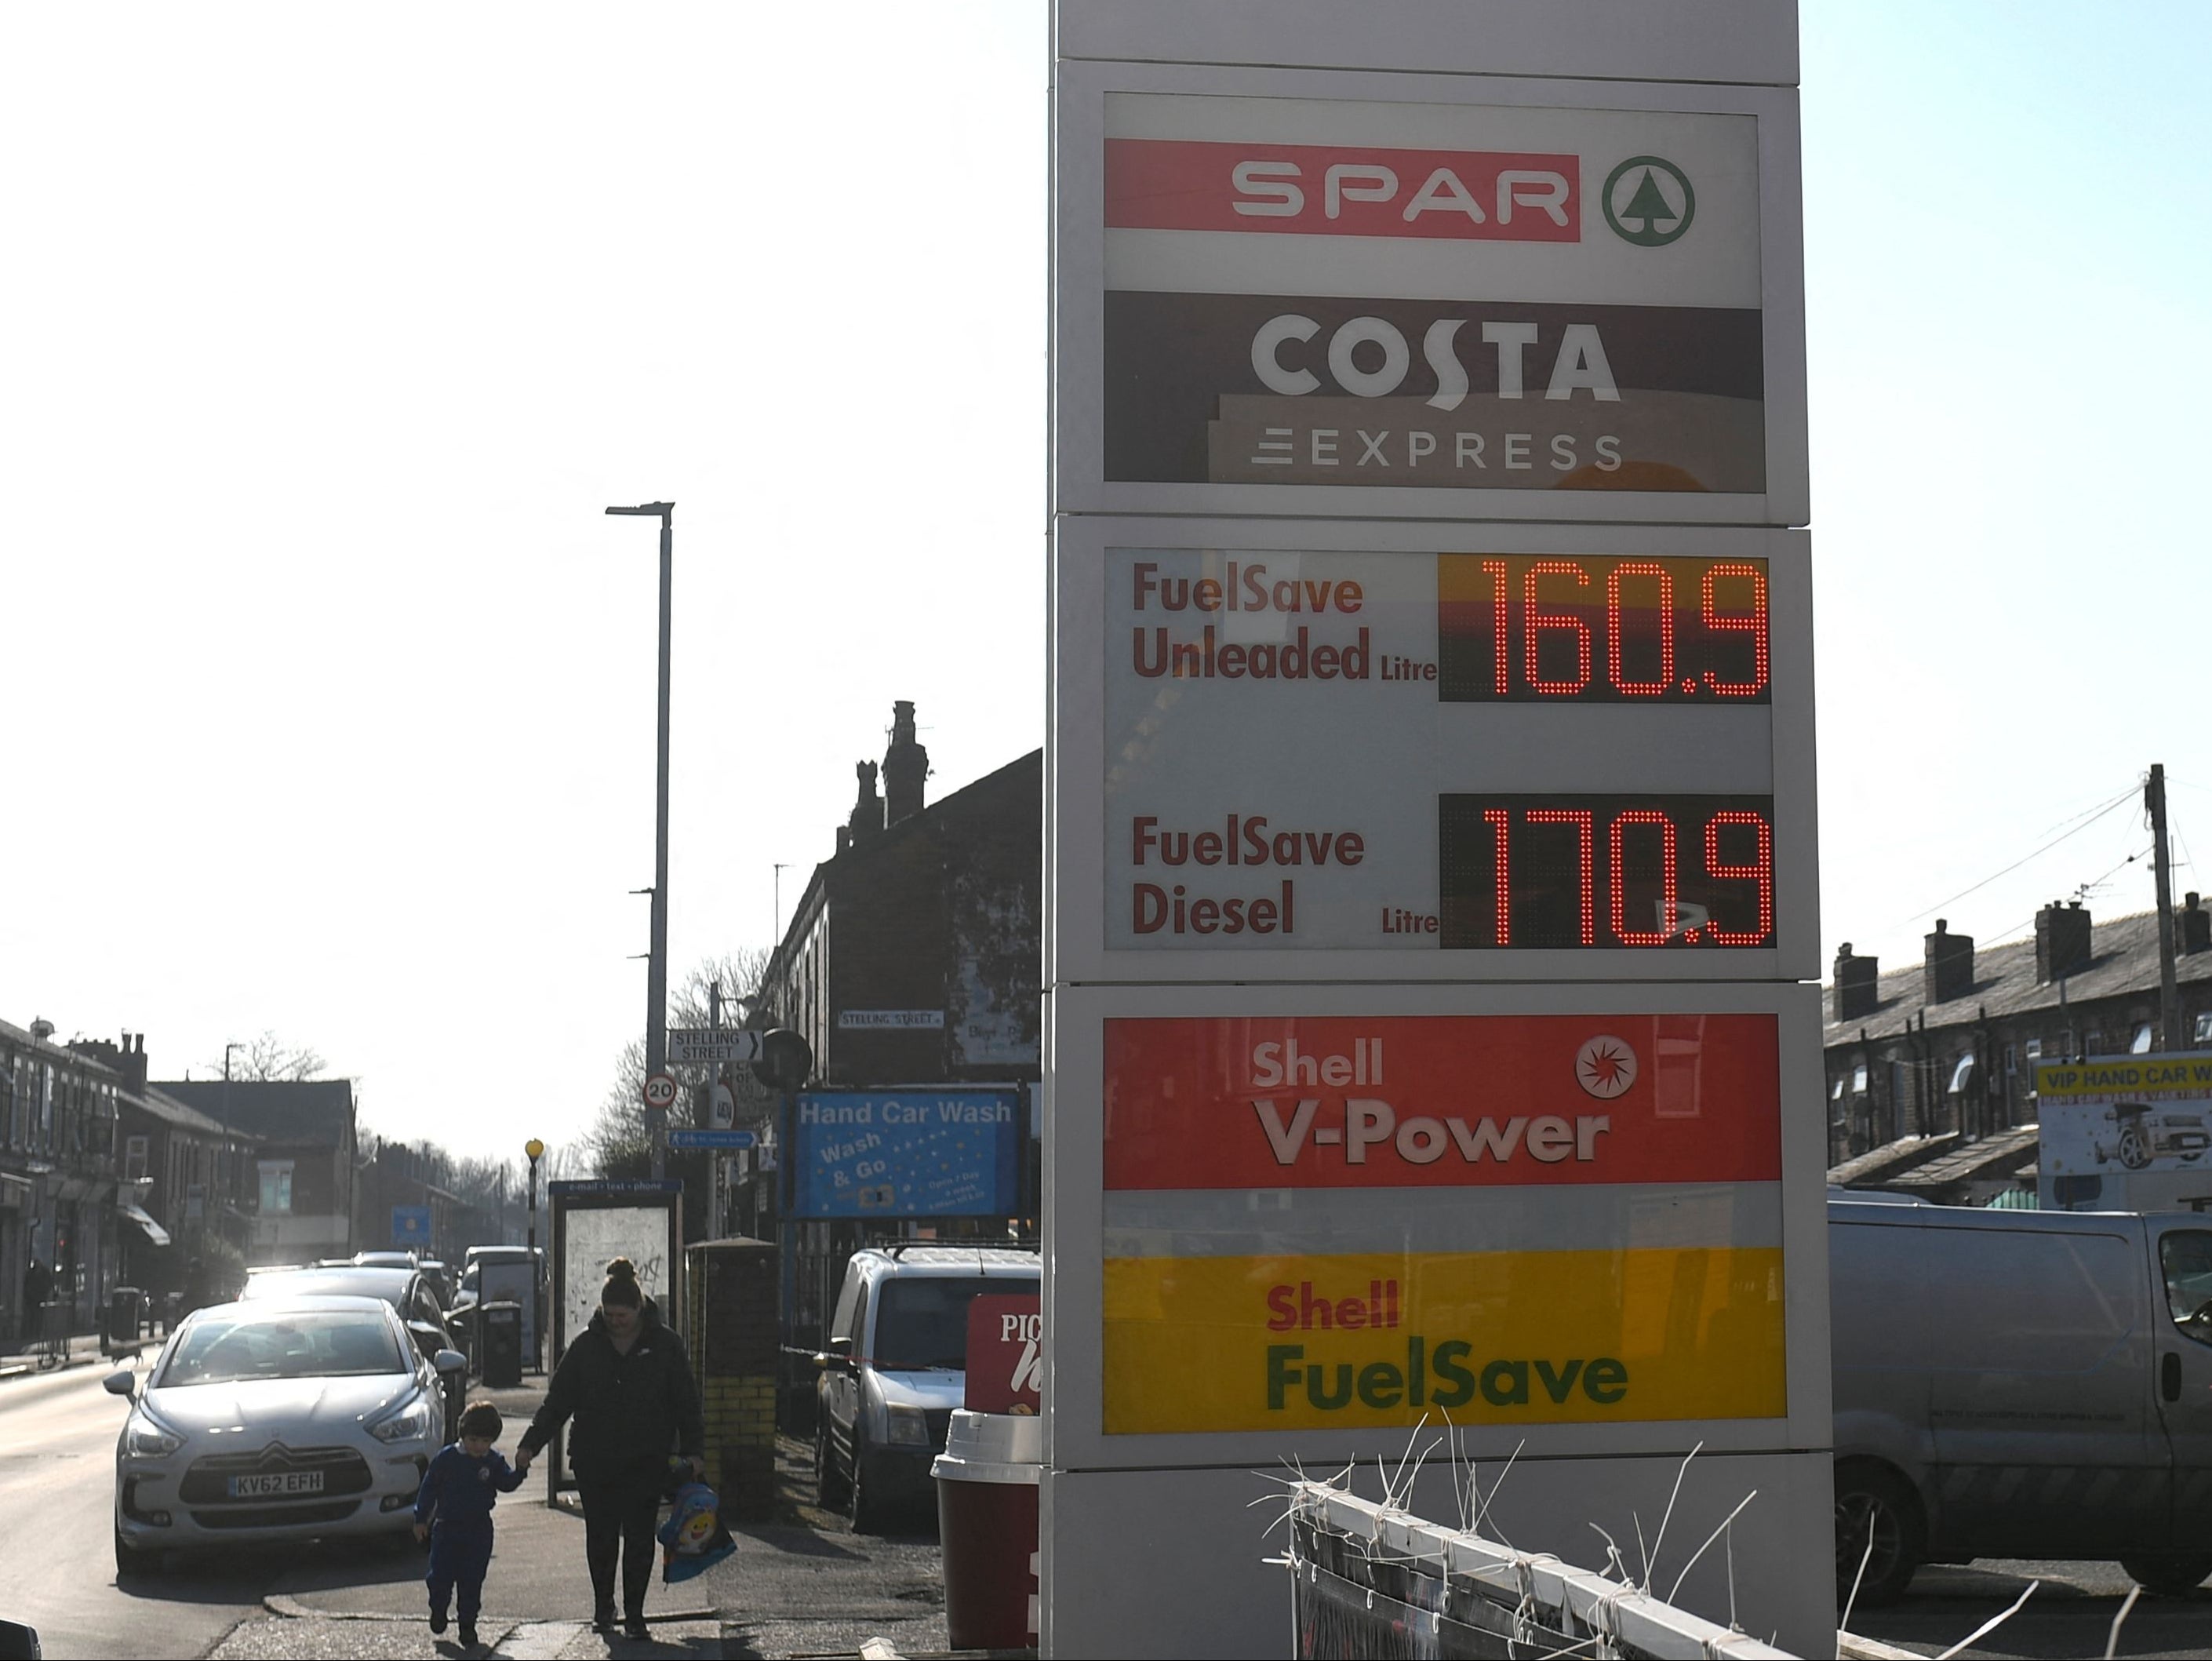 Escalating petrol and diesel prices are putting pressure on transport services